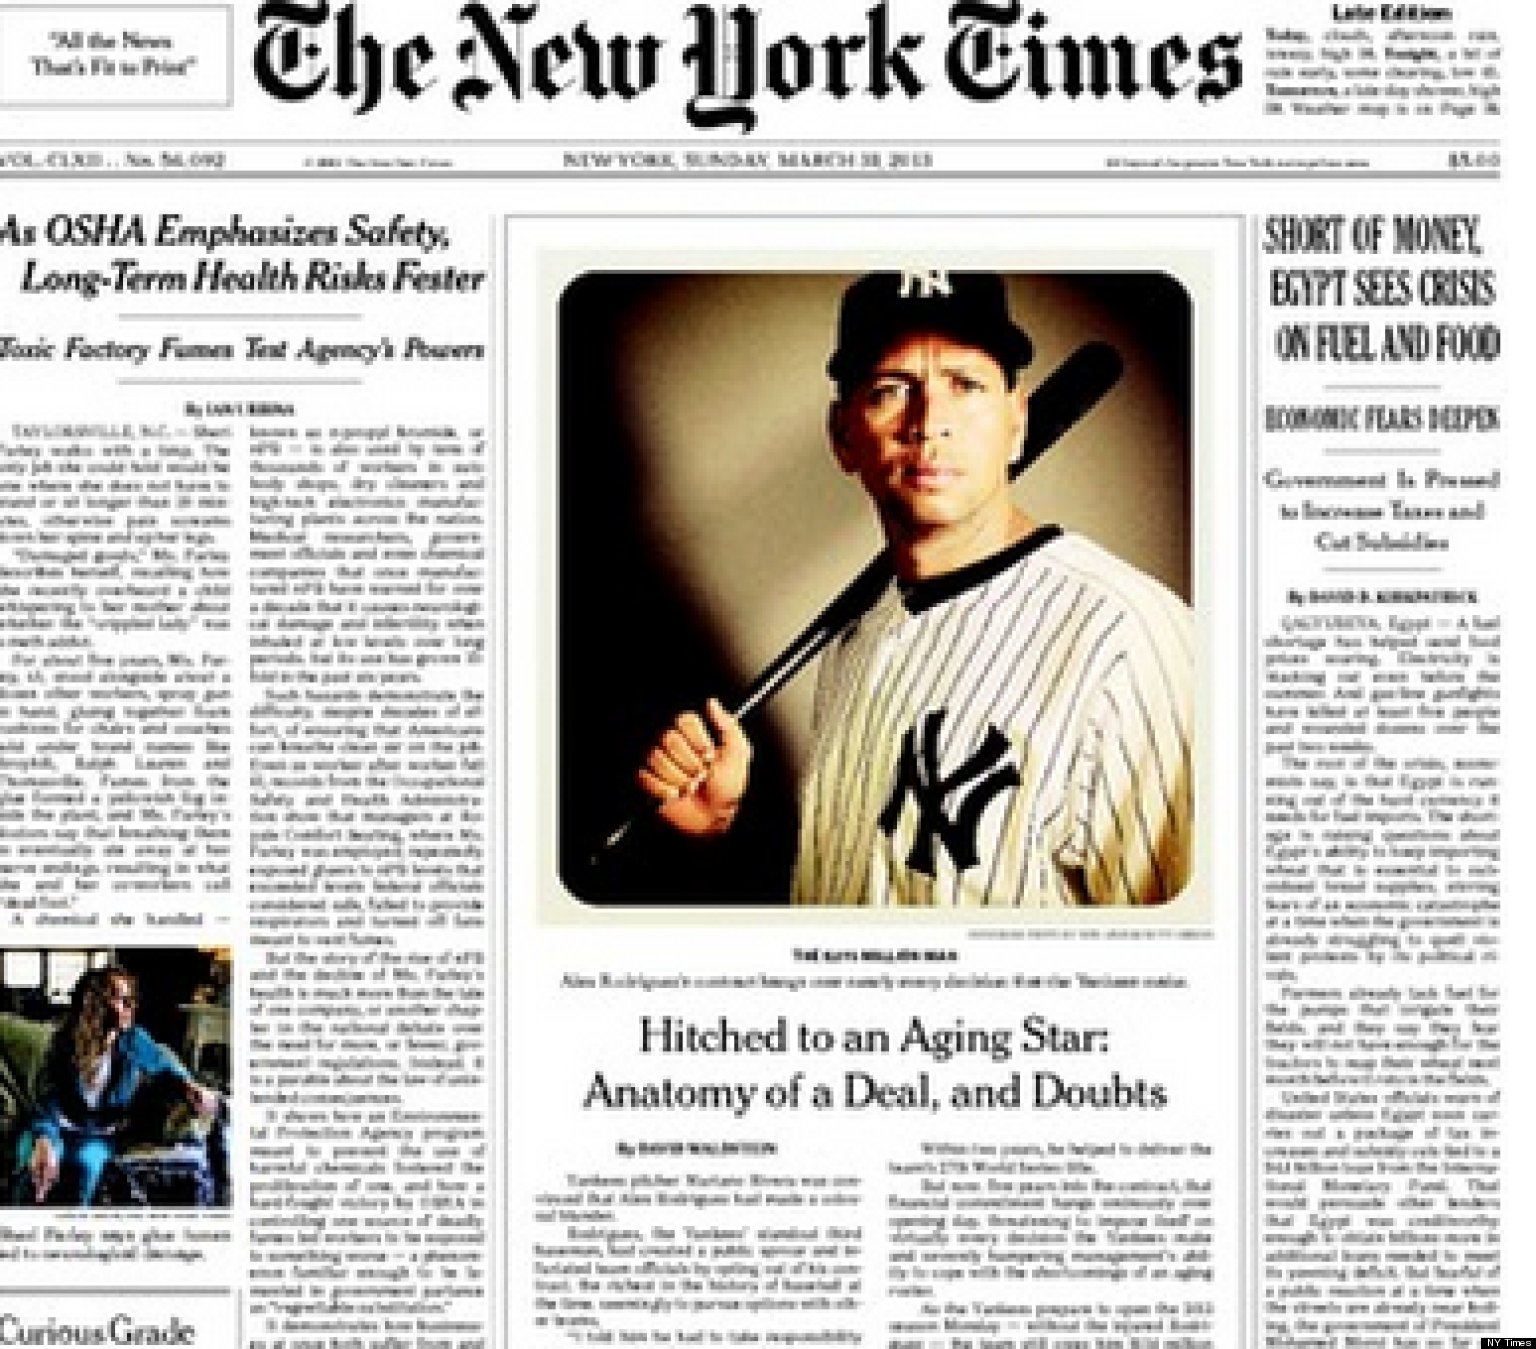 NY Times Runs Instagram Photo On Front Page (PHOTO) | HuffPost